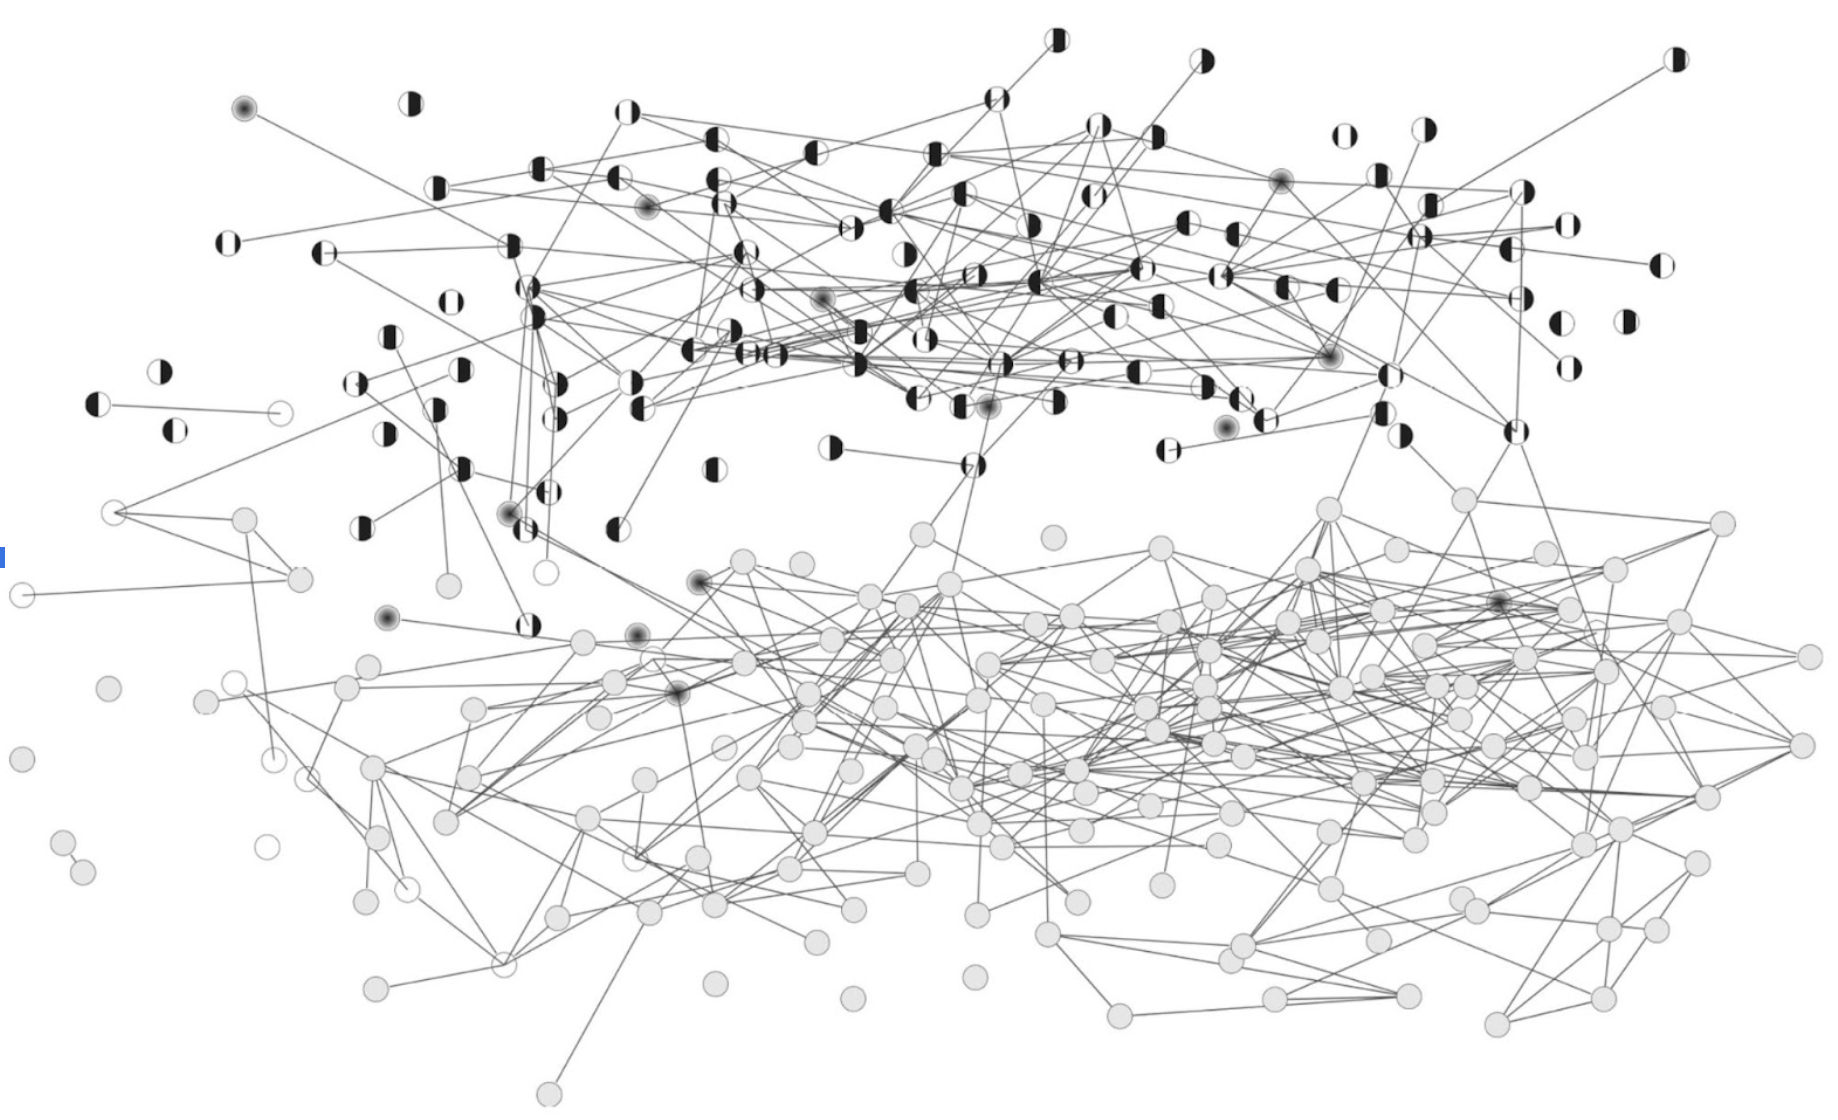 The High School Network Coded by Race. The nodes with bold stripes are self-identified as being "Black," the nodes with gray fill are "white," and the few remaining nodes are either "Hispanic" (center dot fill) or "Other/Unknown" (blank). Source: Human Network by Matthew O. Jackson.